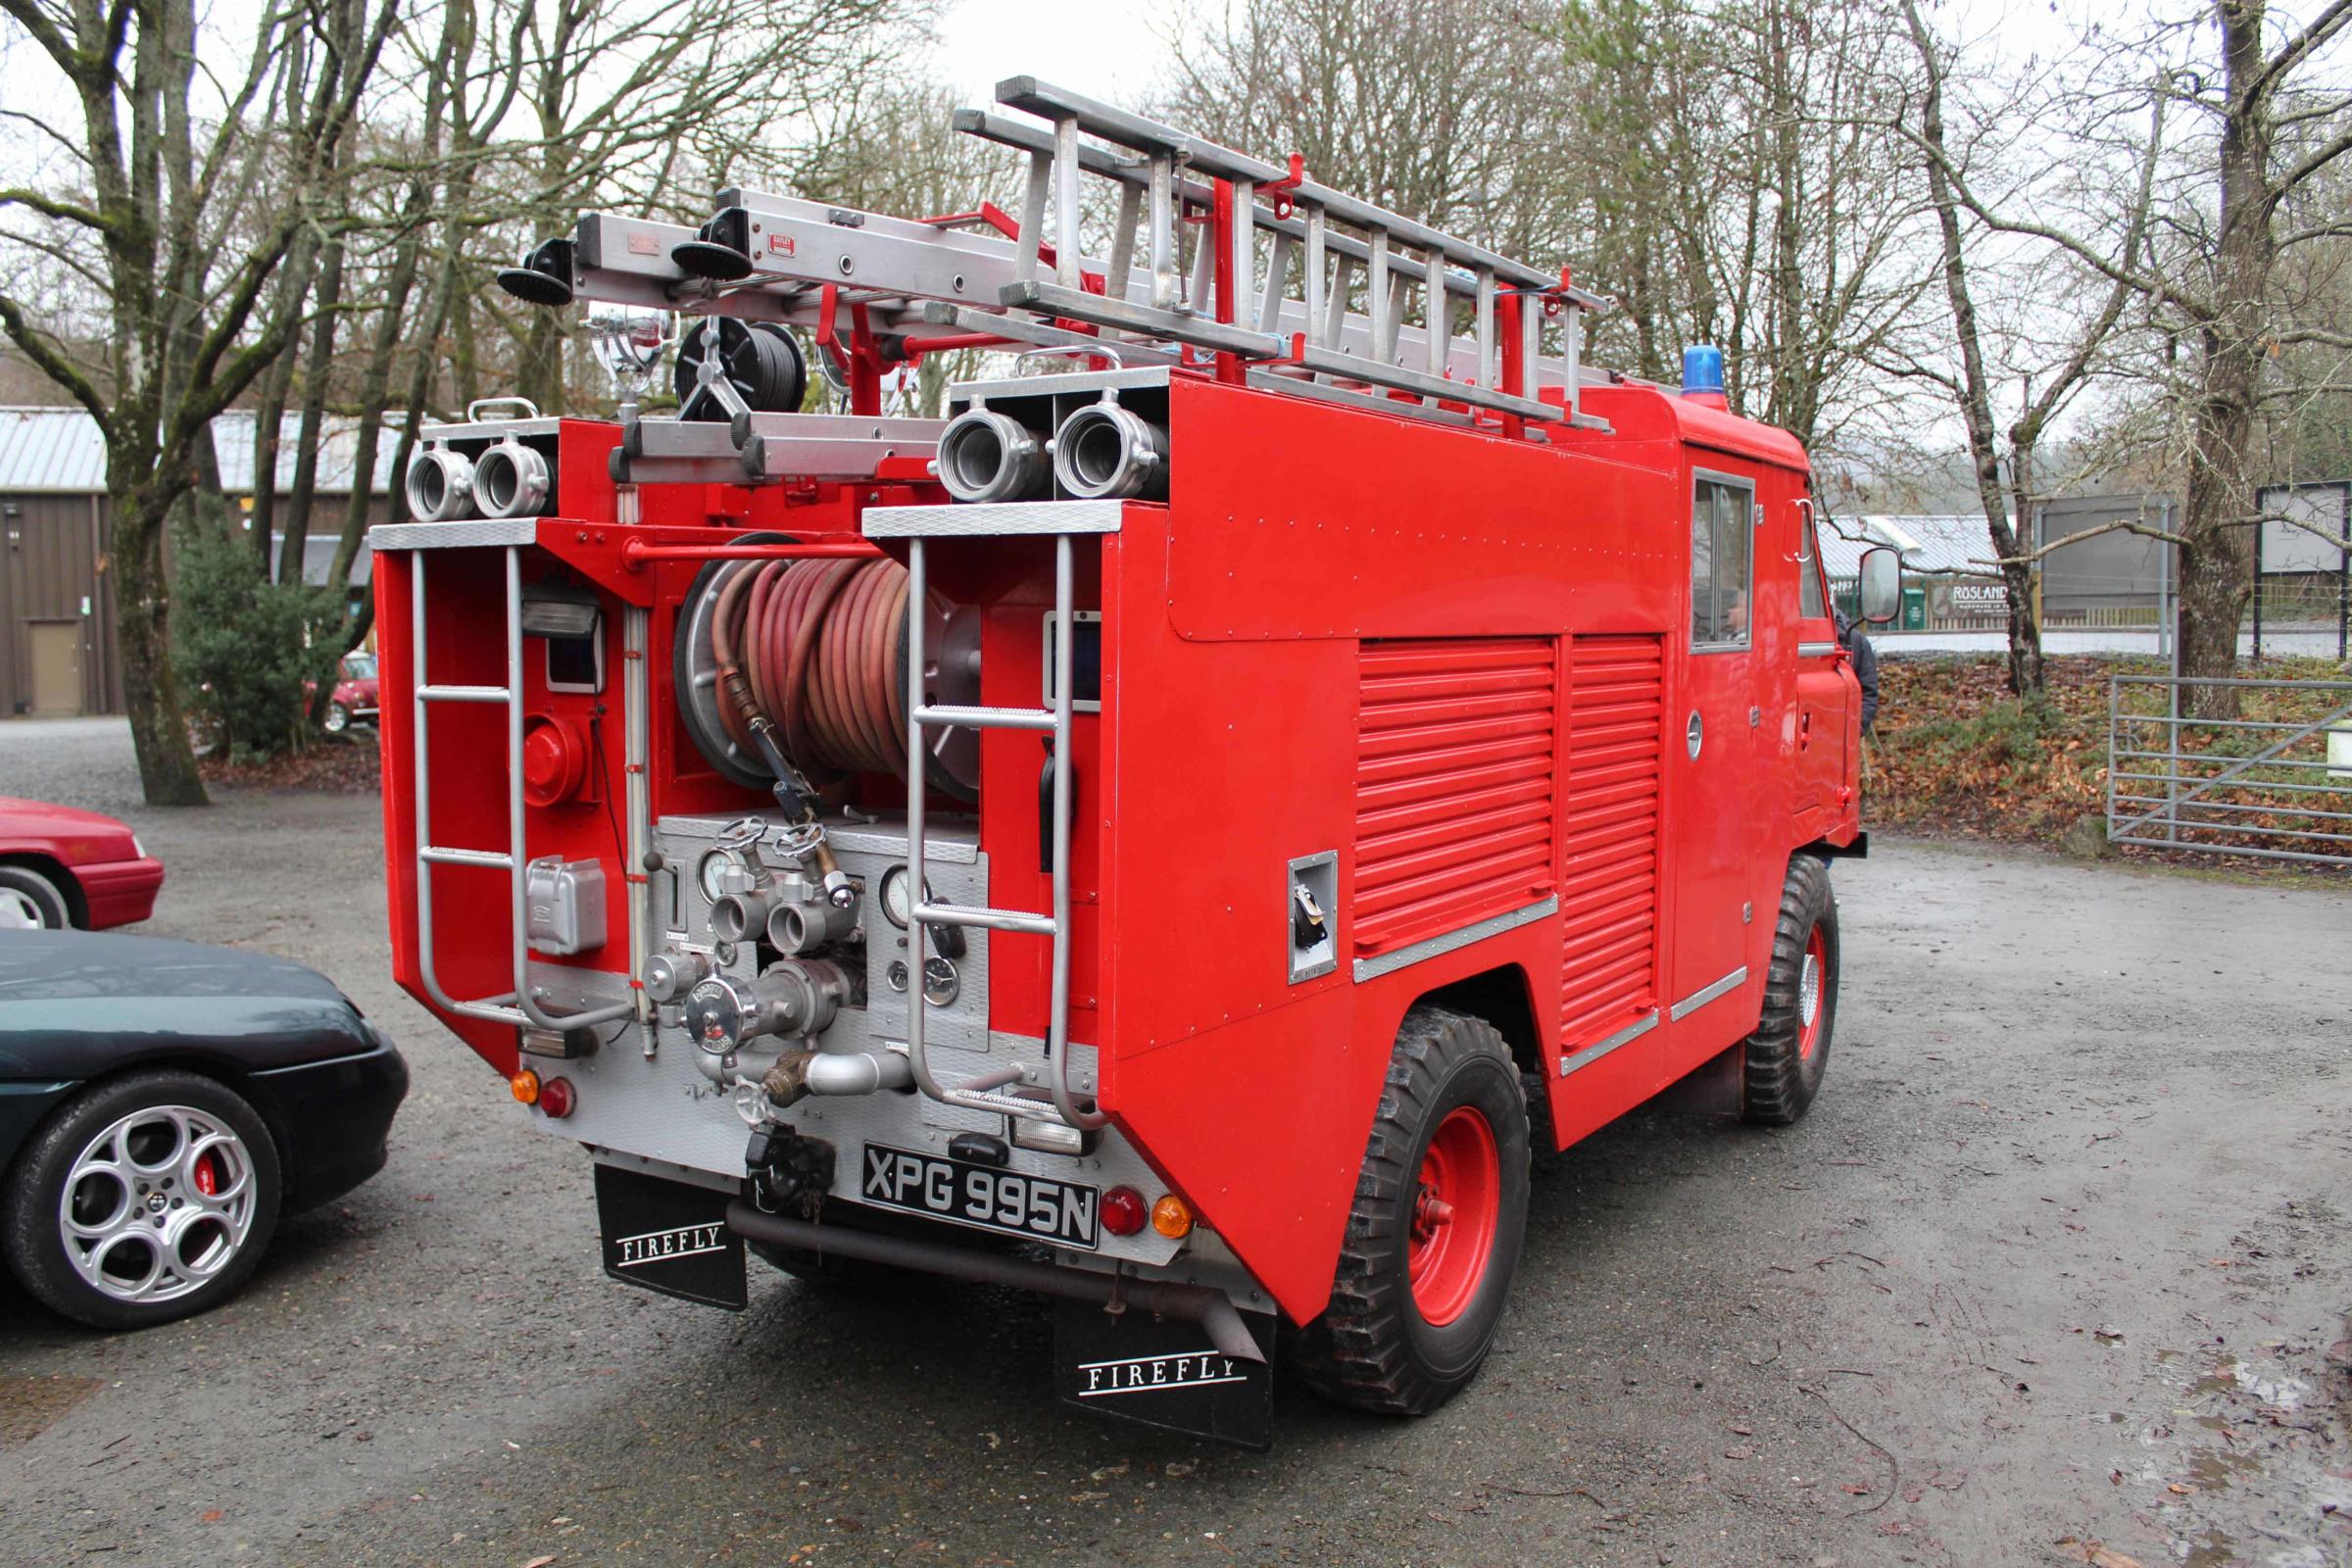 STYLE: Classic Land Rover converted into a fire engine 